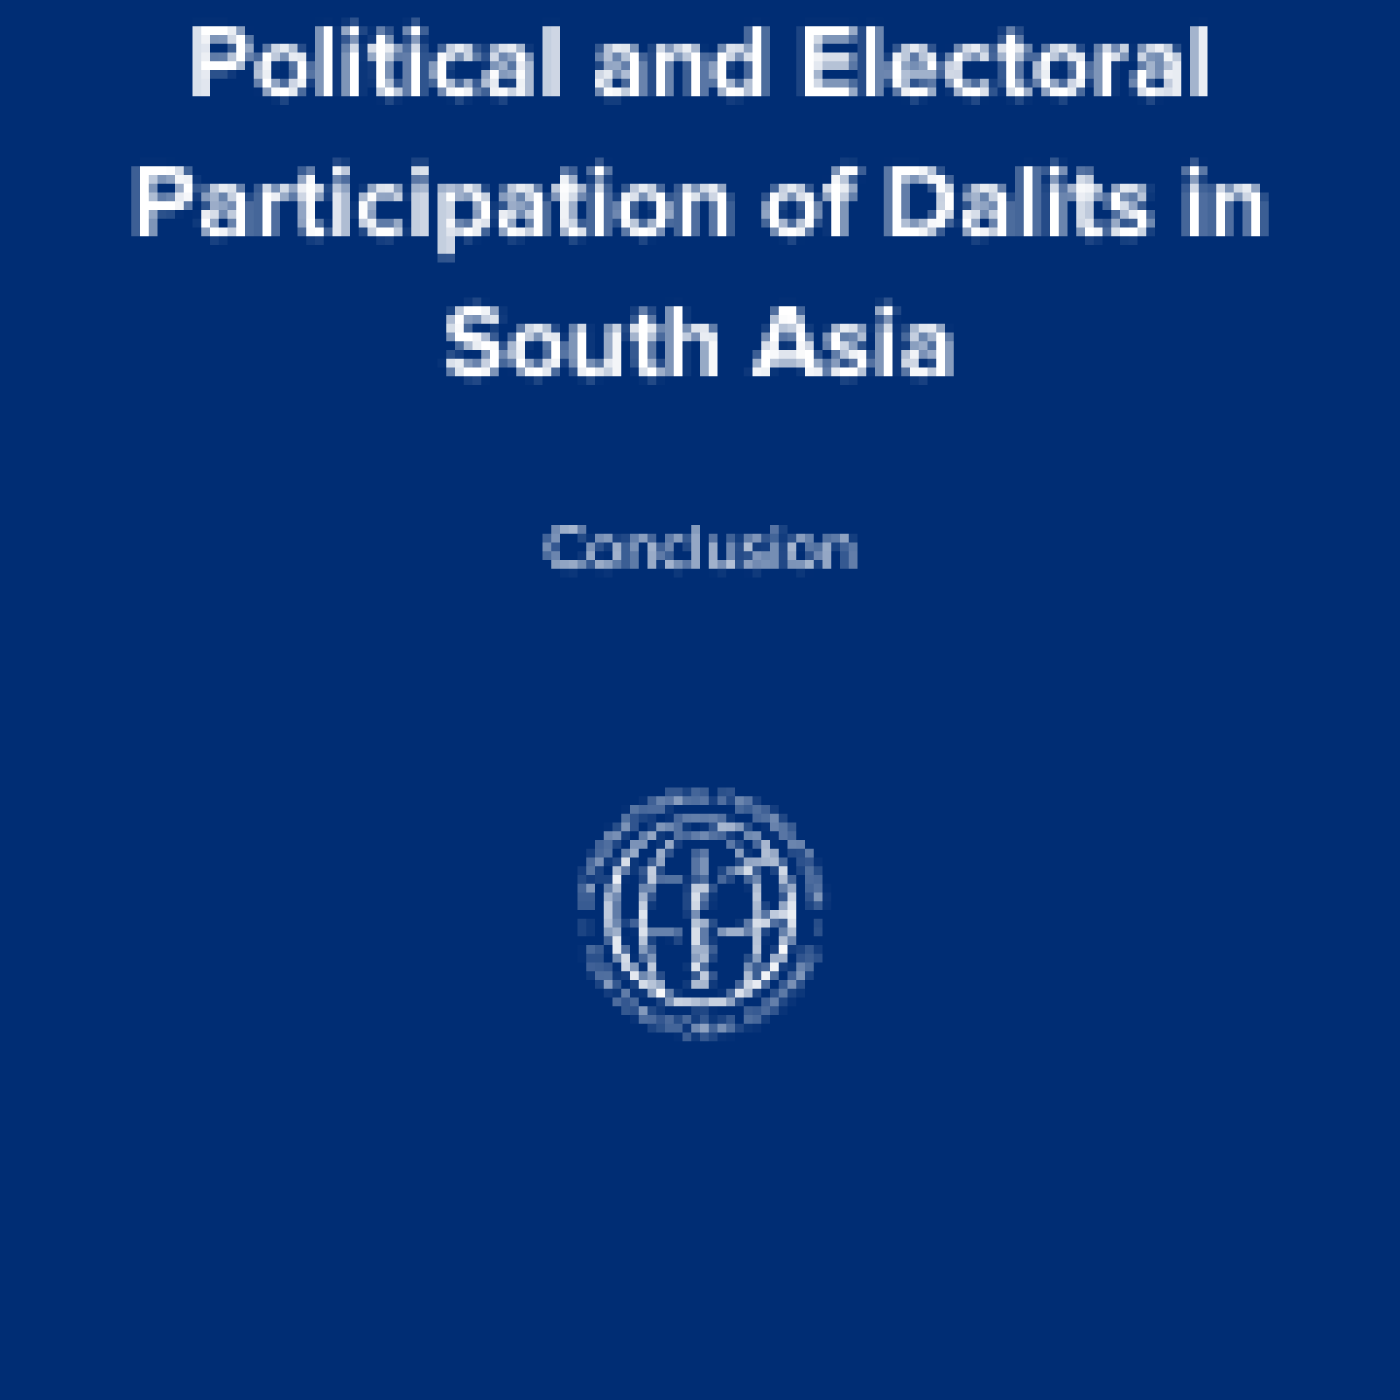 Political and Electoral Participation of Dalits in South Asia: Conclusion